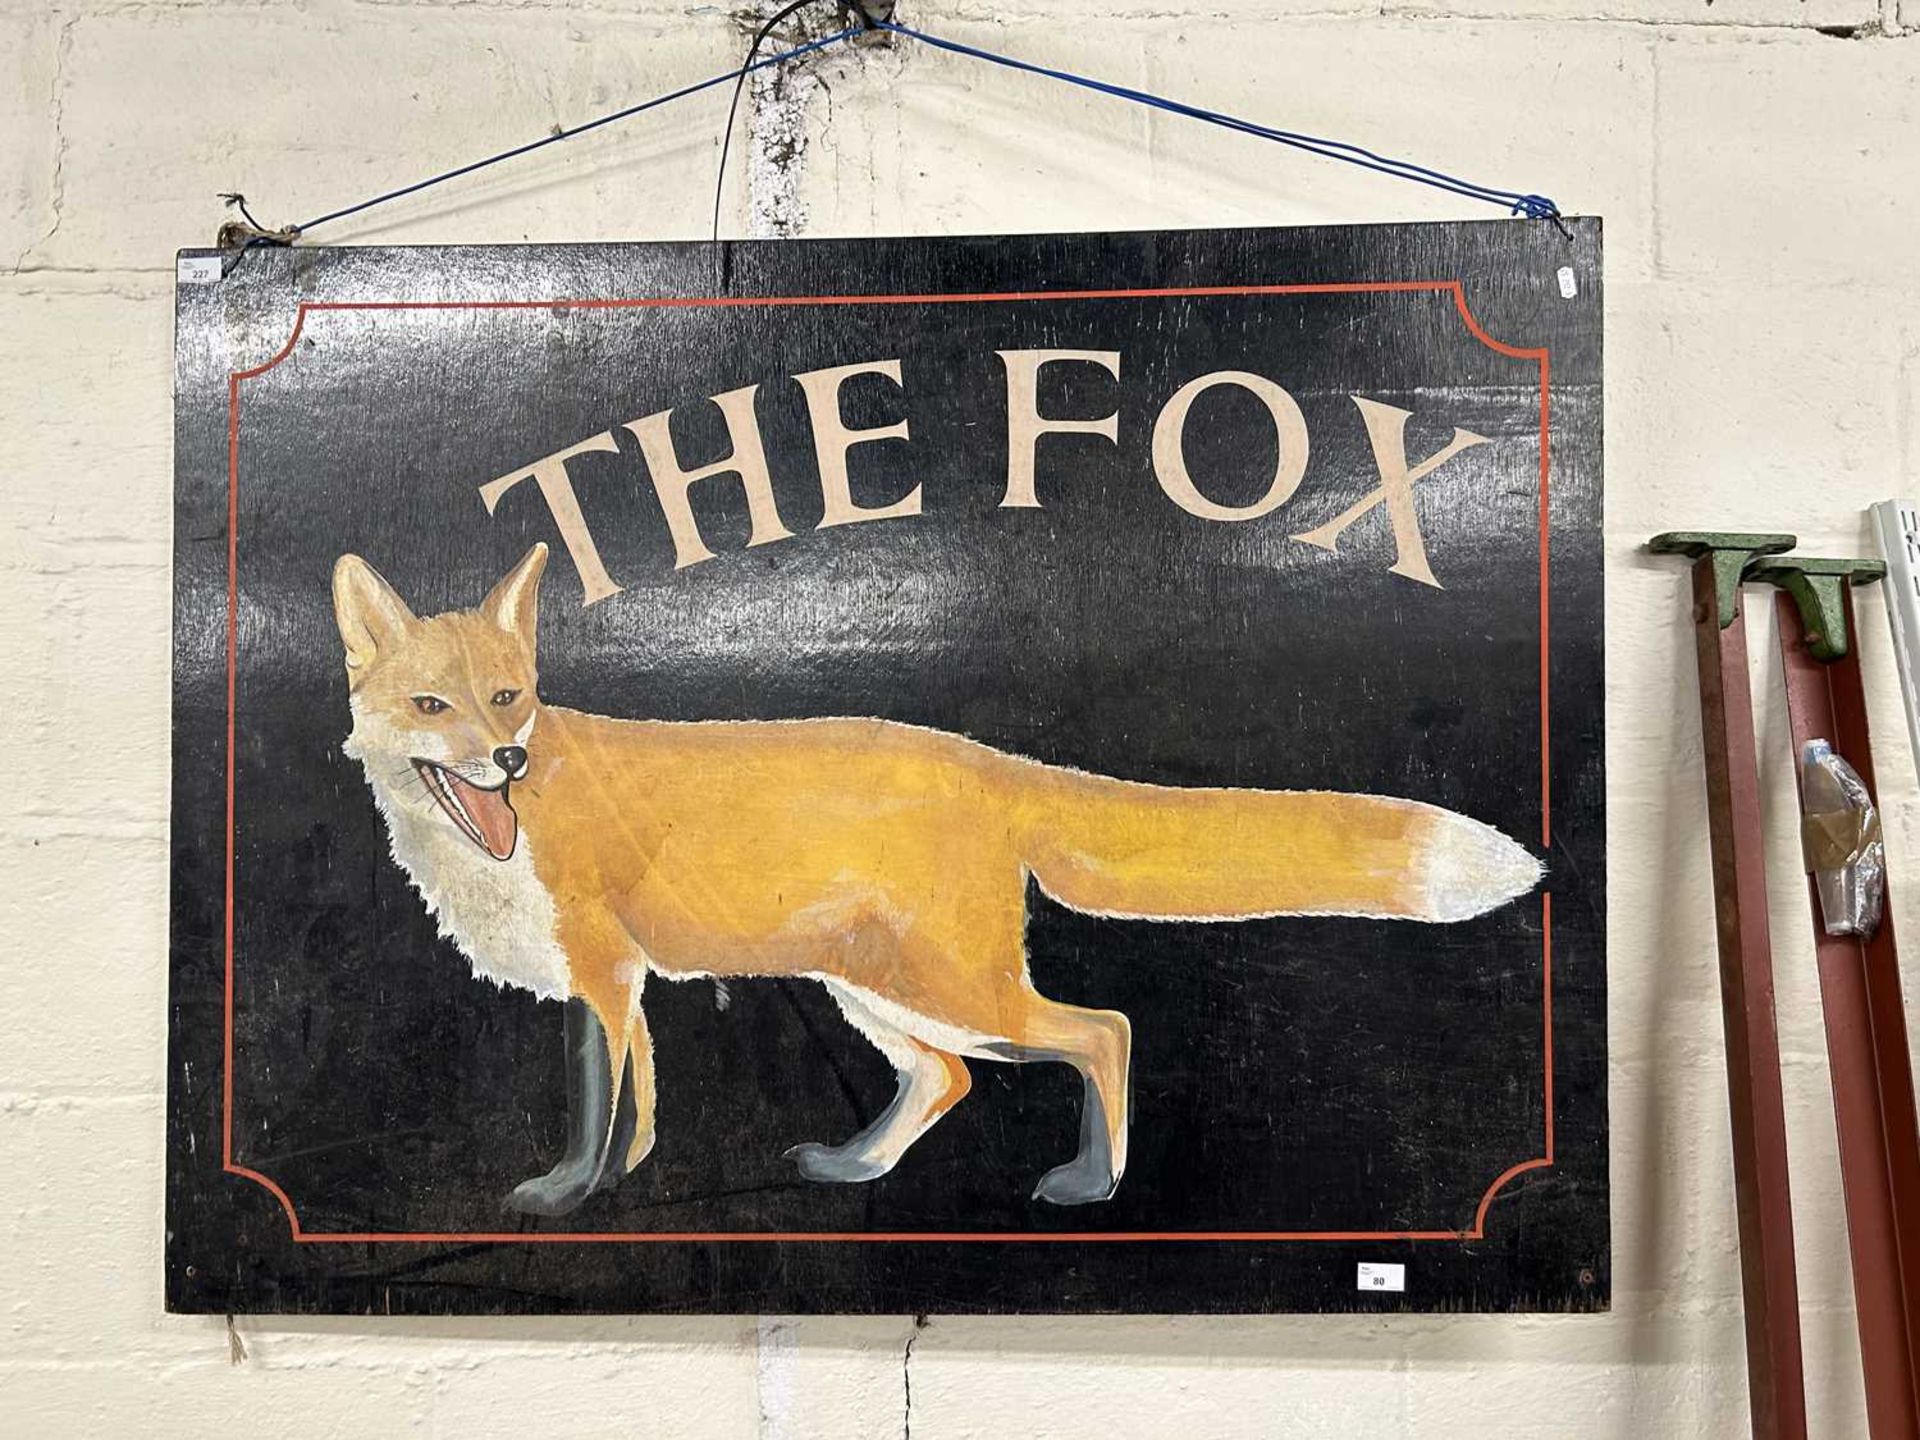 Painted pub advertising sign, The Fox, width approx 120cm, height approx 90cm